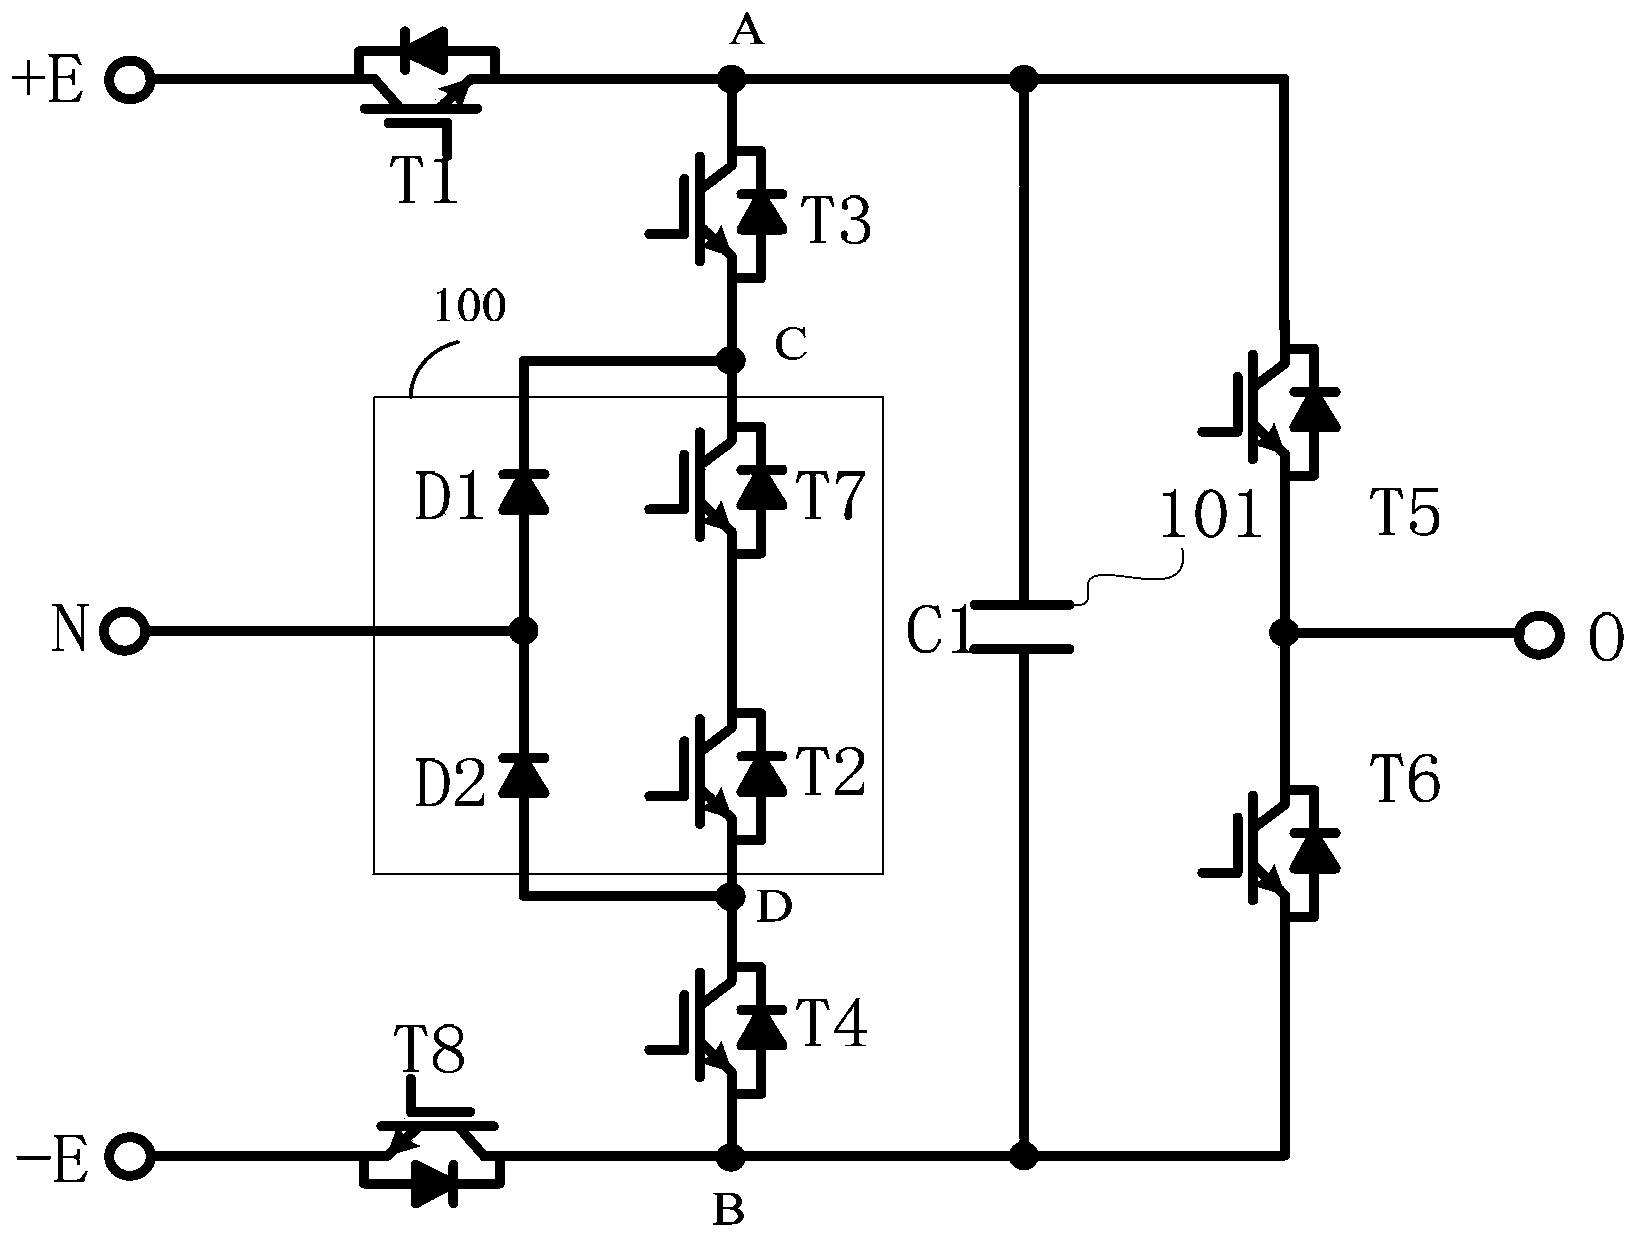 Single-phase five-level topology and inverter